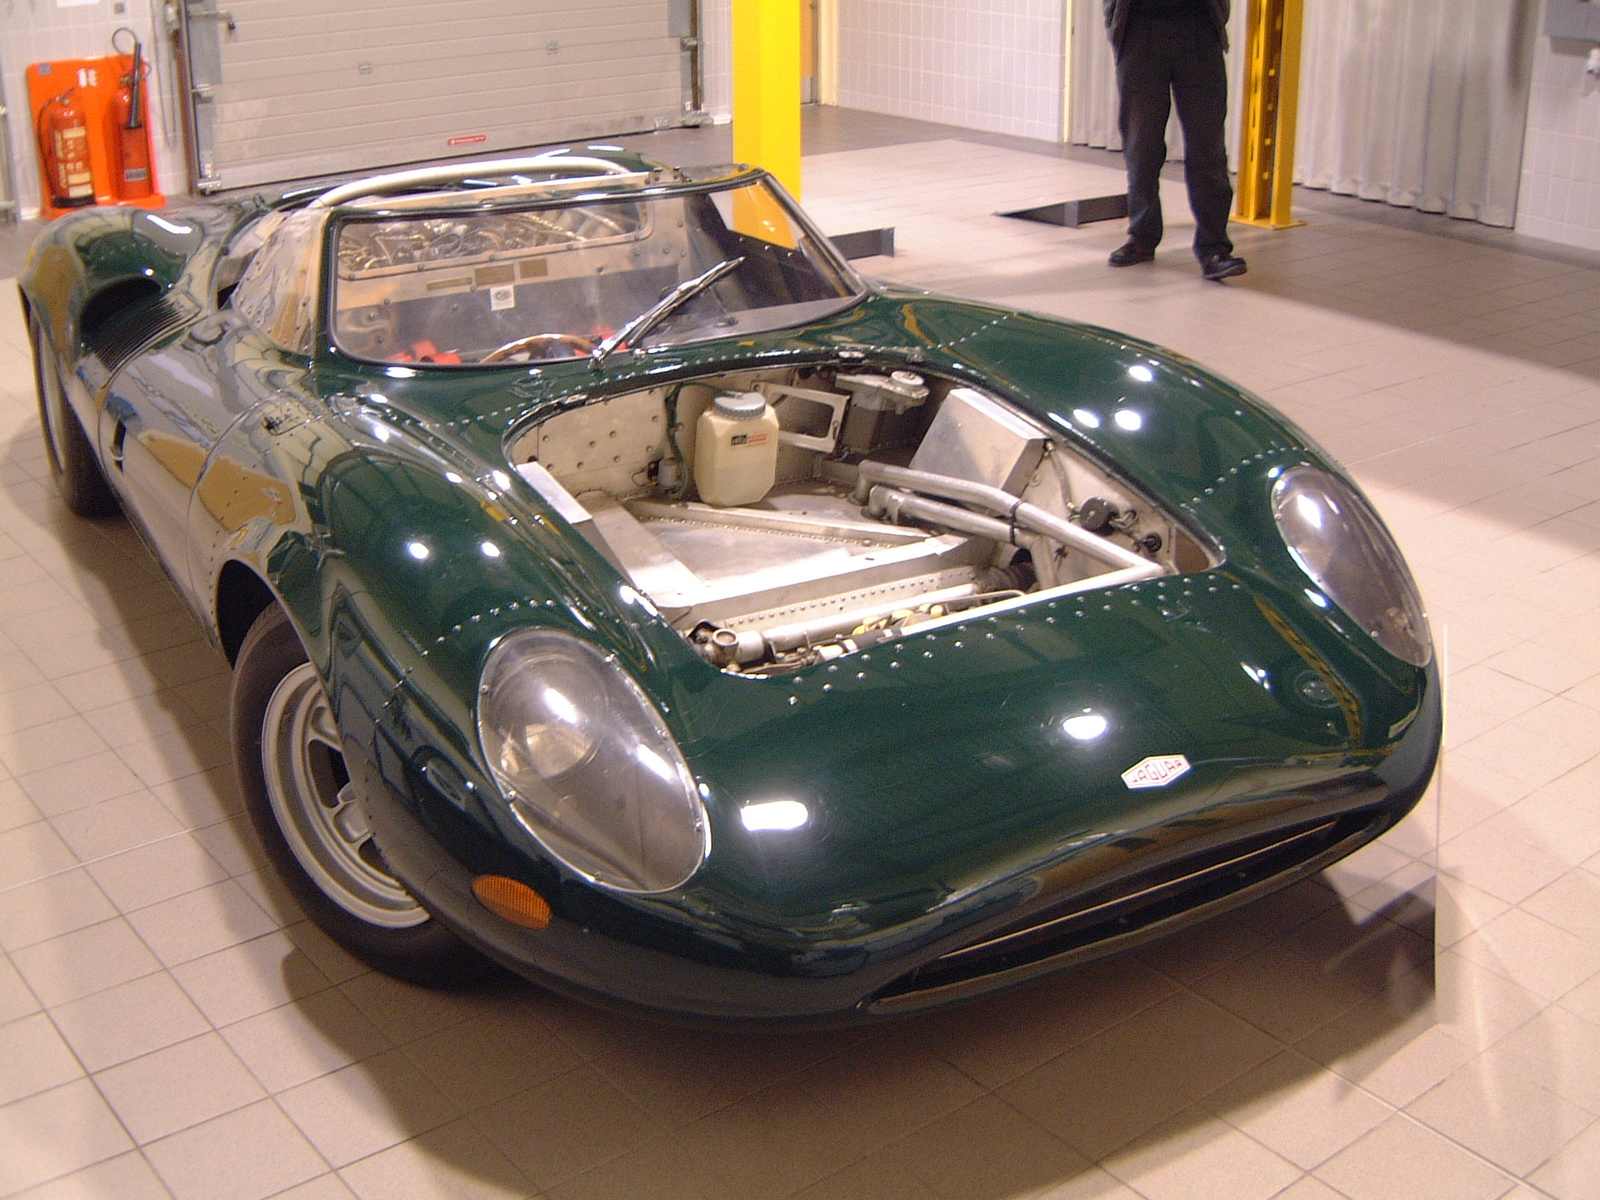 Xj13 front